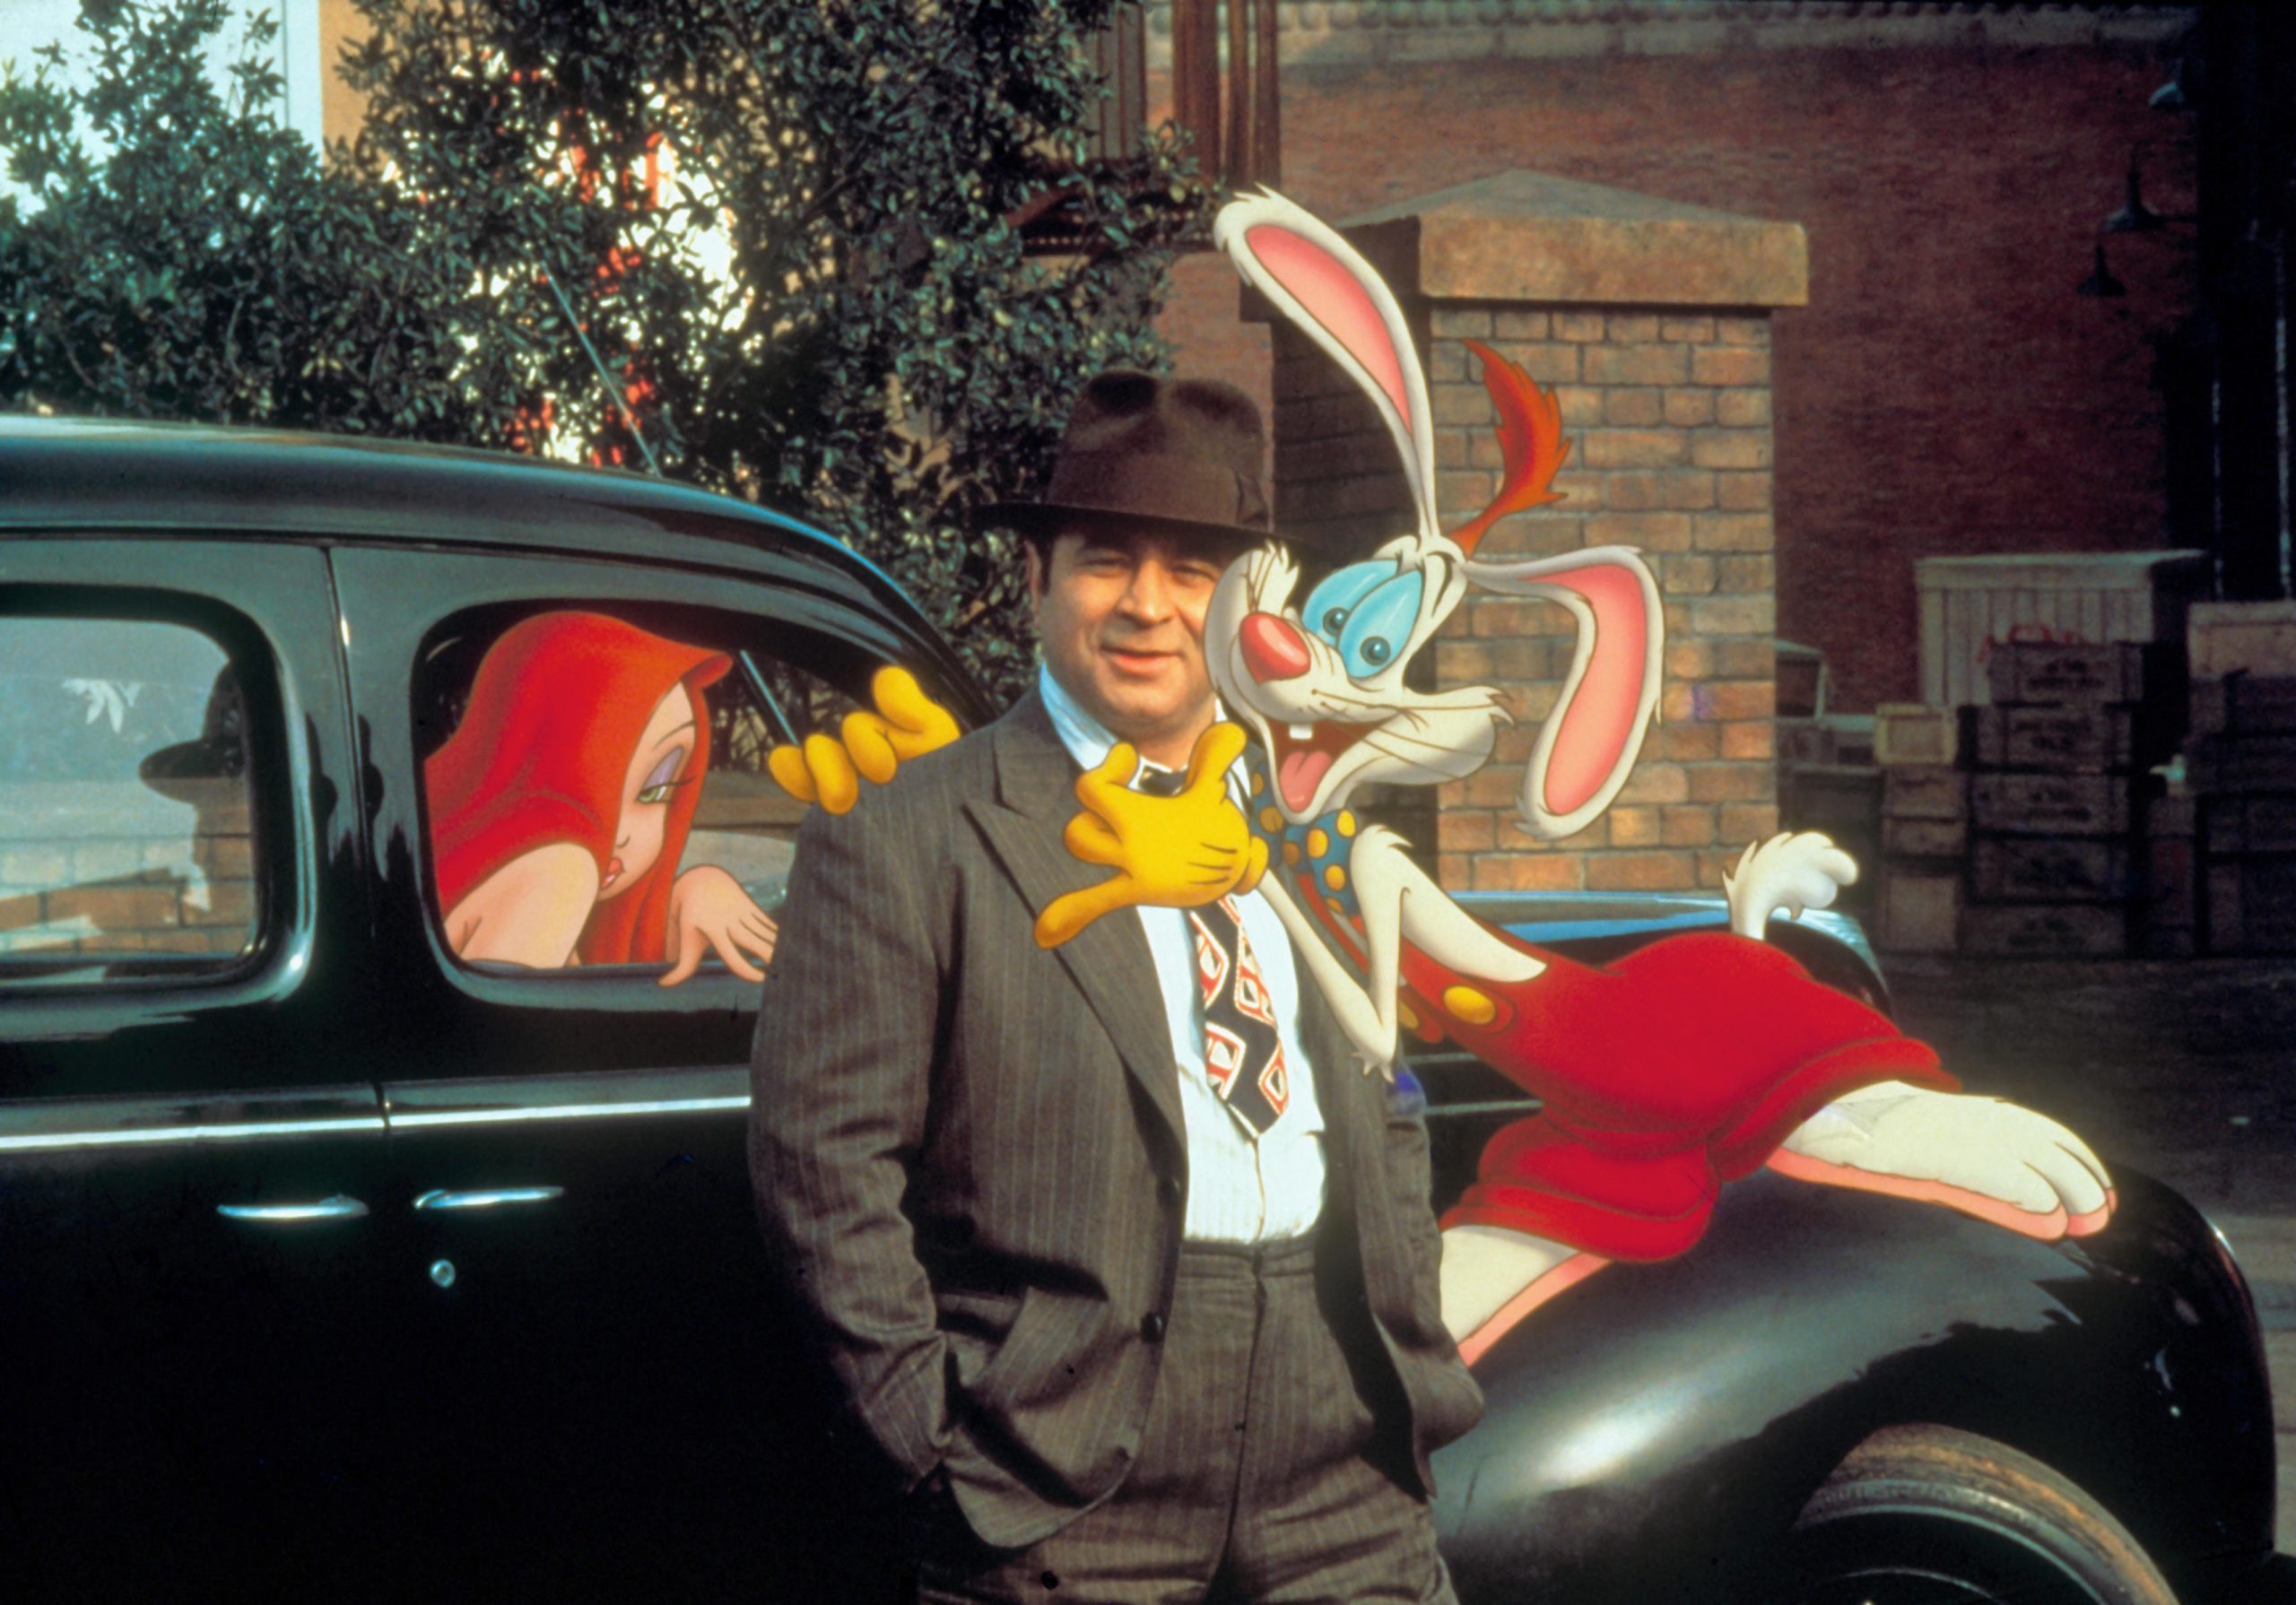 You could add this Ford V8 from Who Framed Roger Rabbit? to your car-toon collection